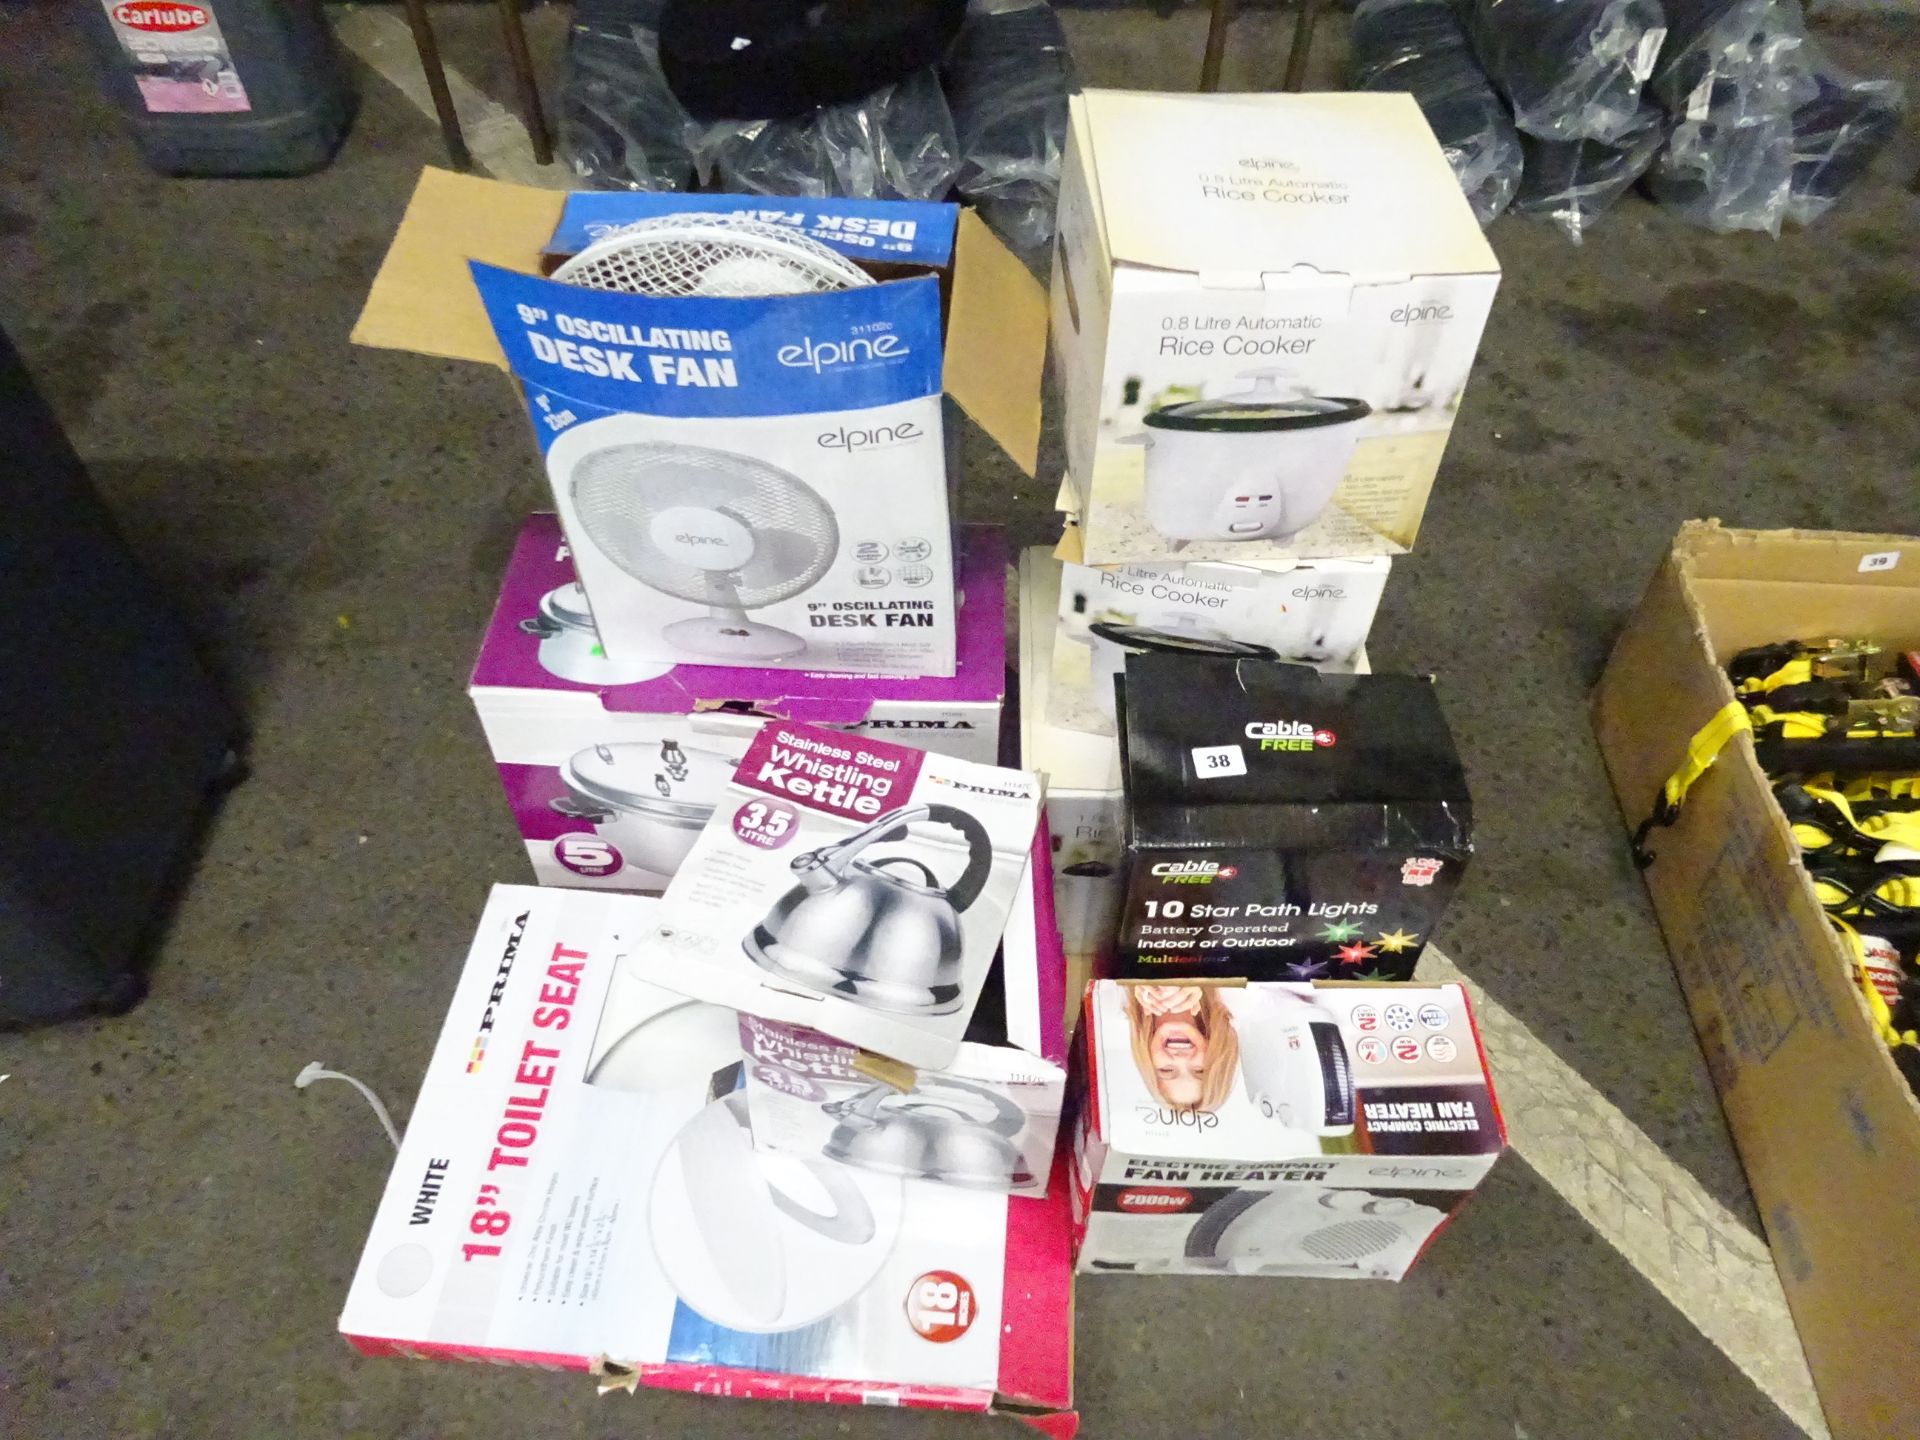 3 RICE COOKERS, HEATER, WHISTLING KETTLES, PRESSURE COOKER & ODDS